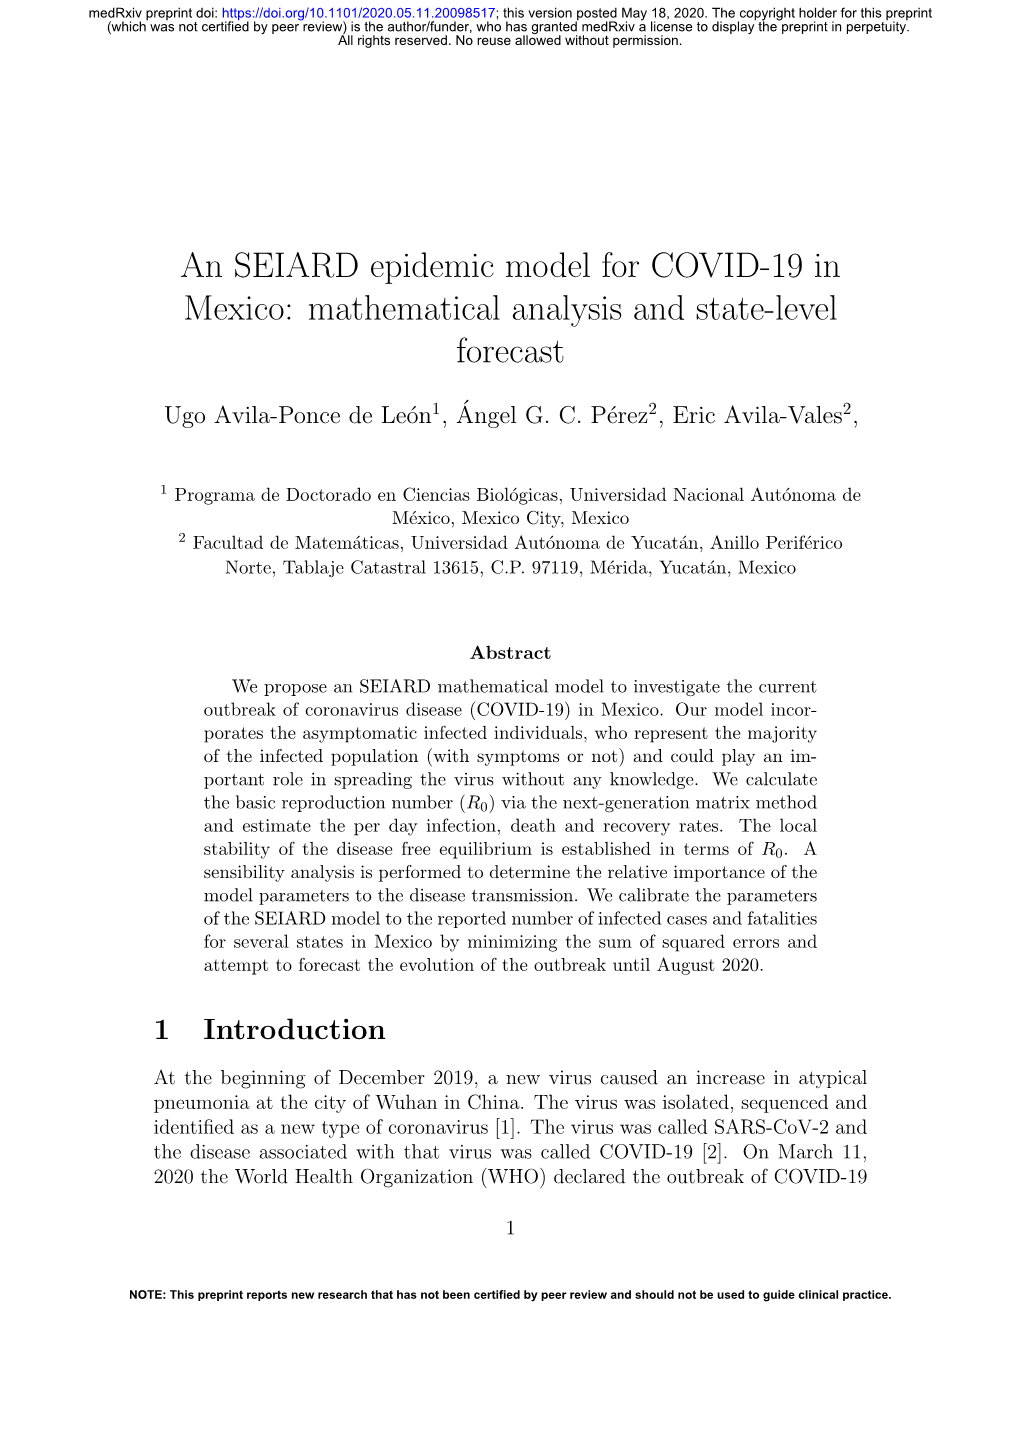 An SEIARD Epidemic Model for COVID-19 in Mexico: Mathematical Analysis and State-Level Forecast